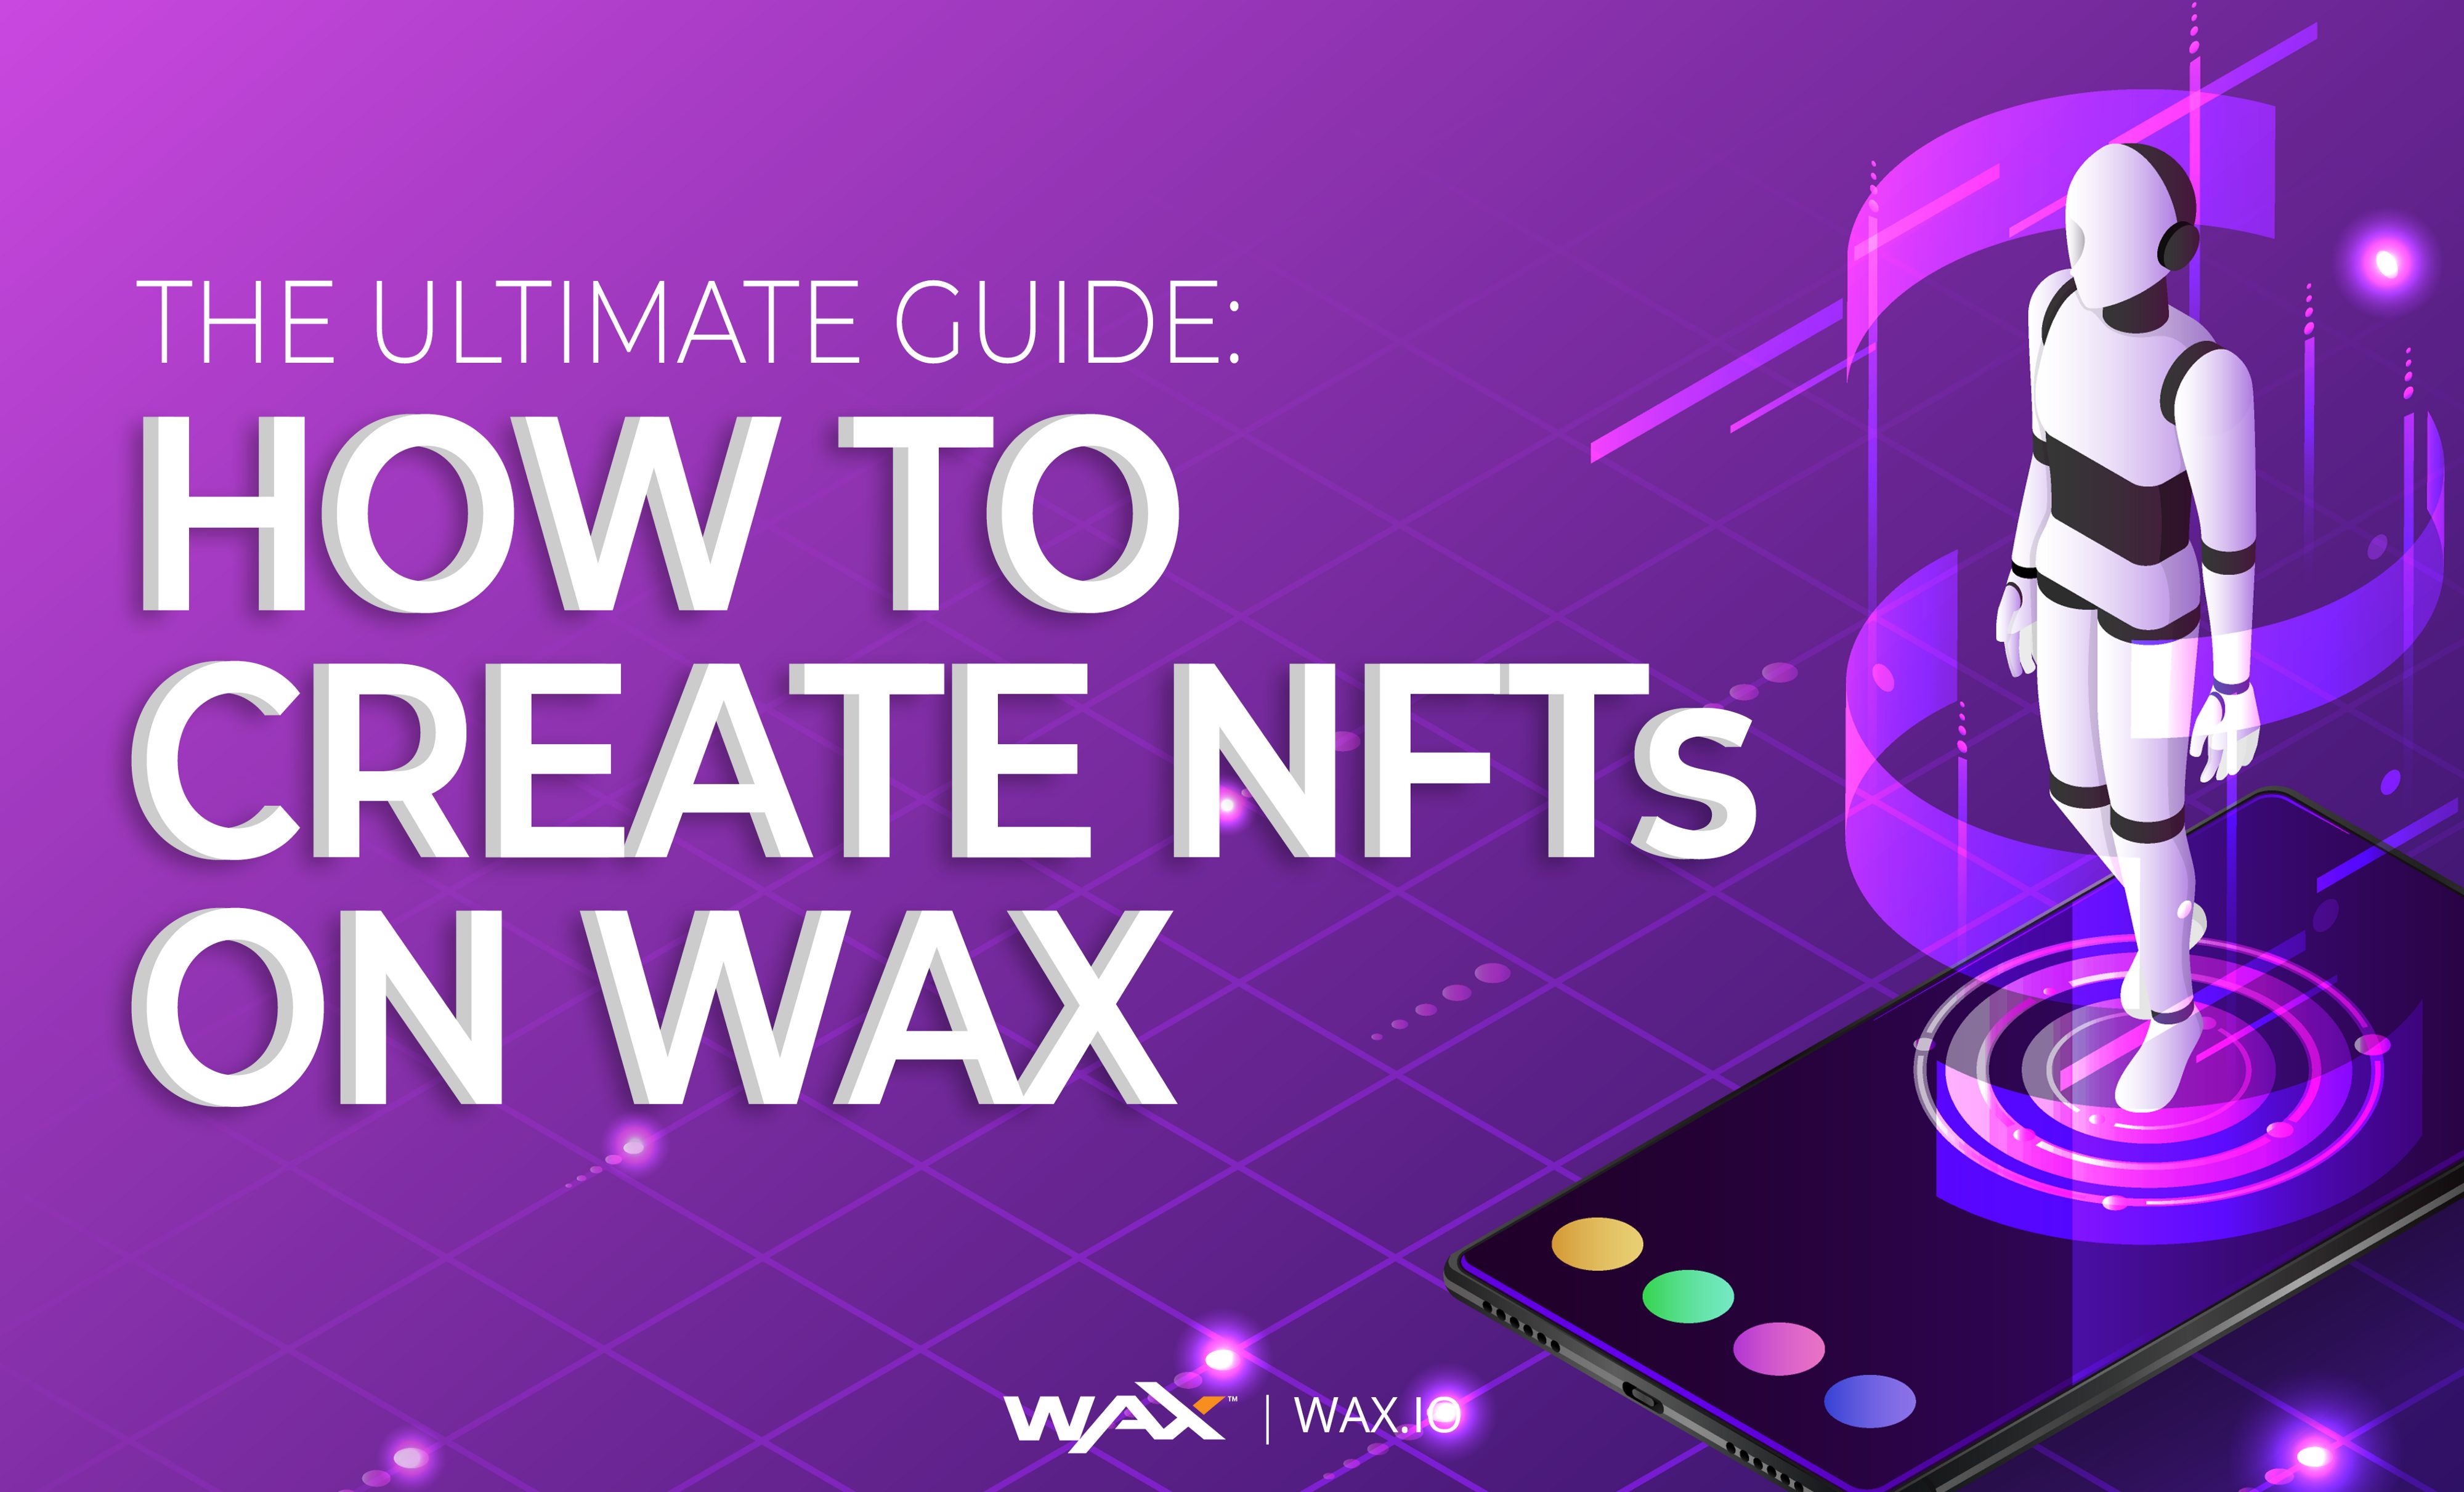 How To Create NFTs on WAX Guide